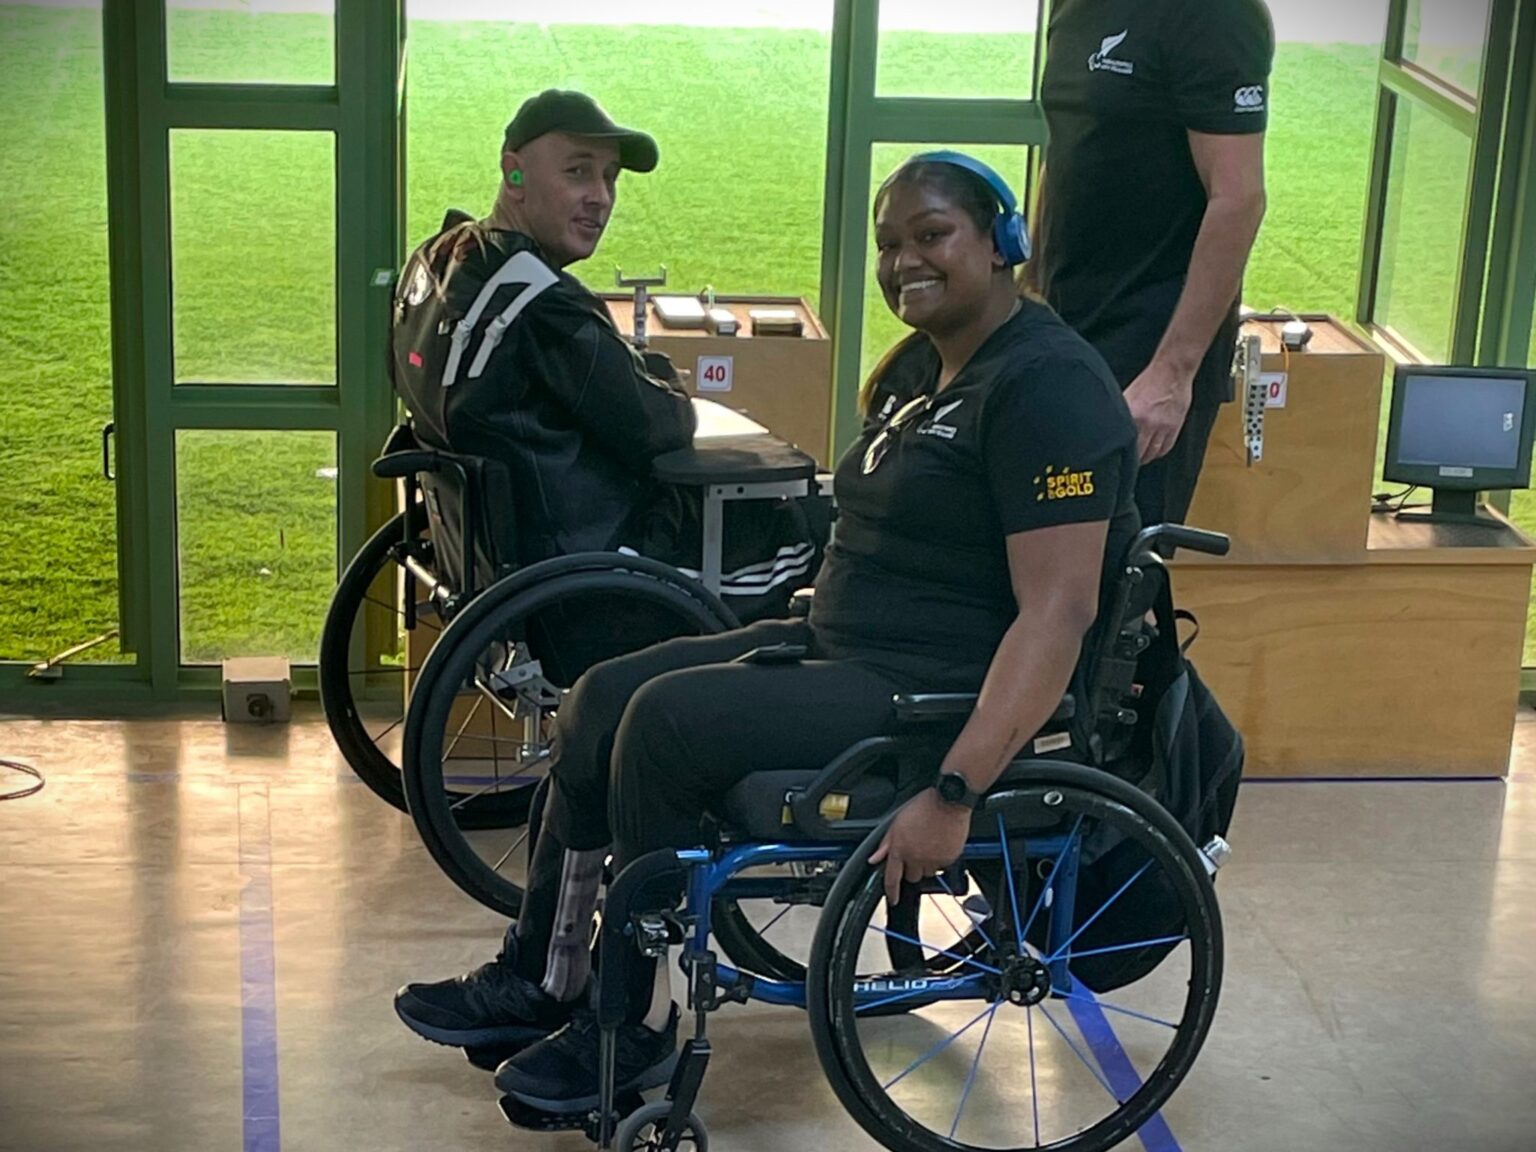 Mike and Neelam in wheelchairs smiling in front of green shooting range